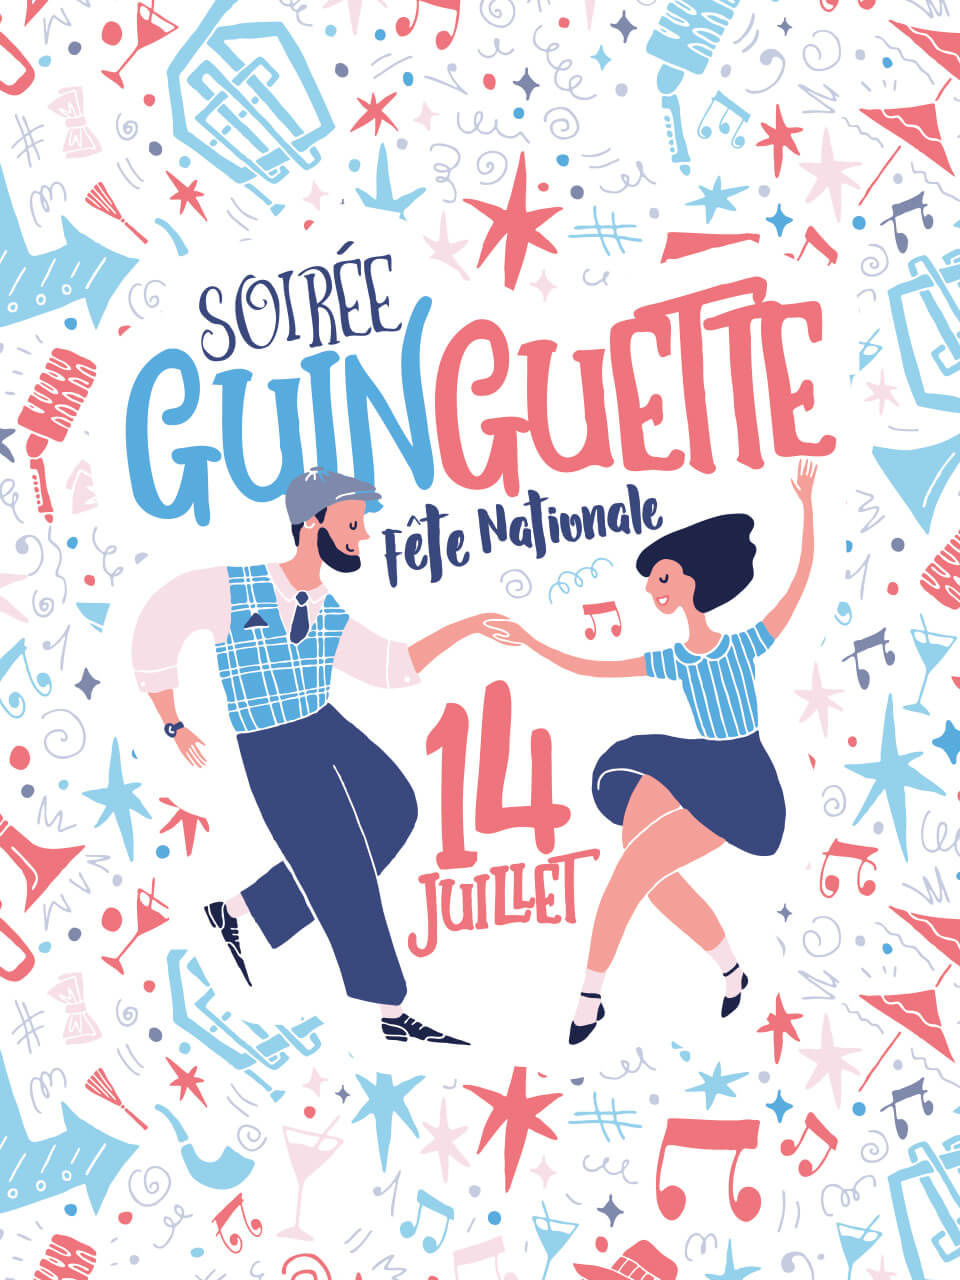 National Day Guinguette Party Summer Events Les Gets